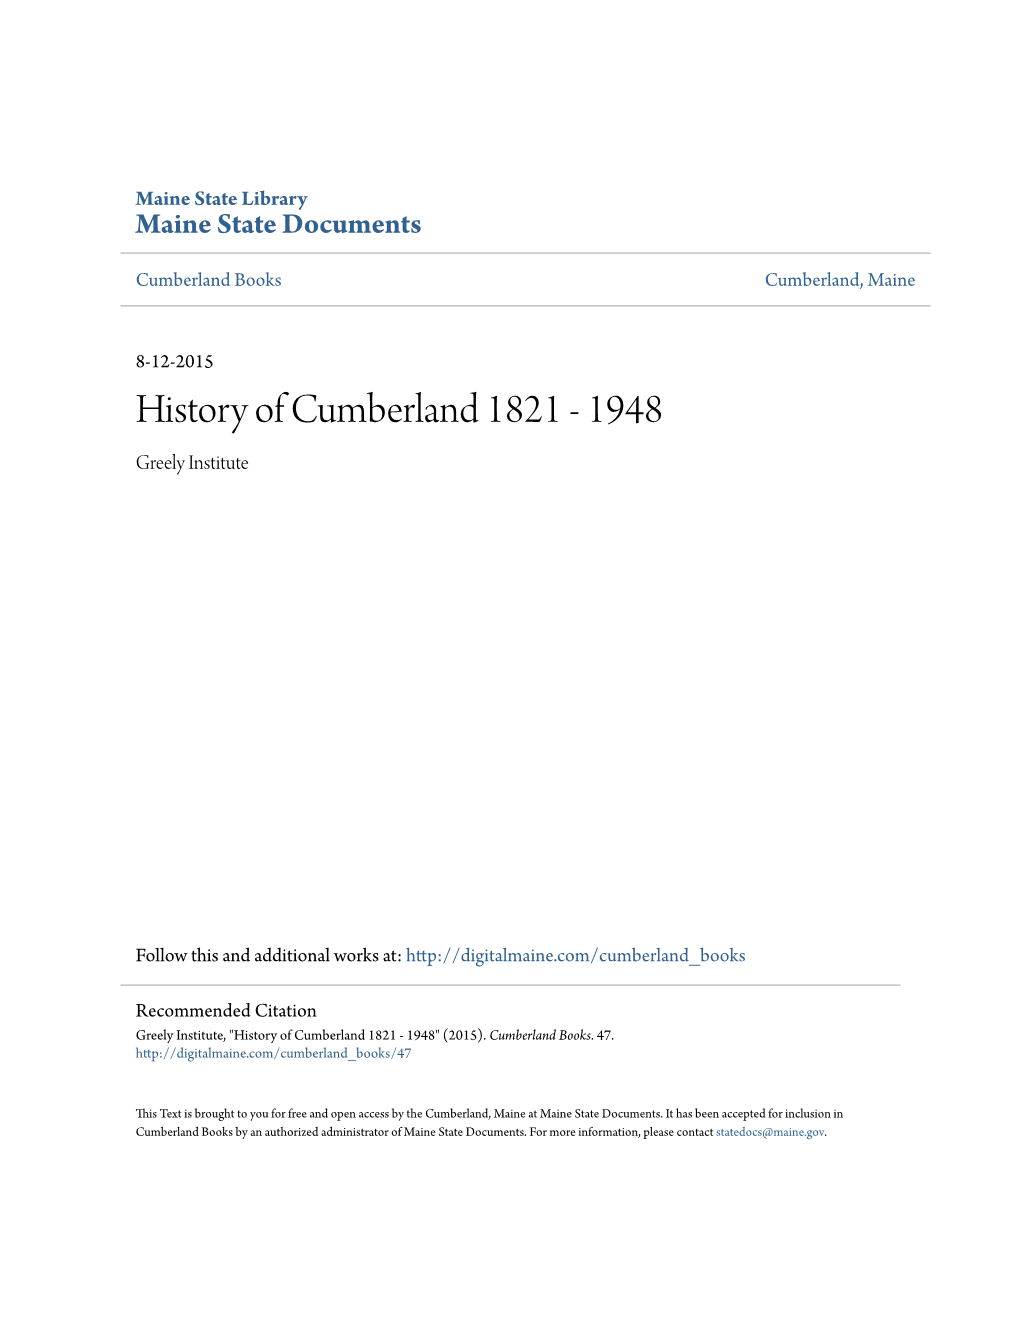 History of Cumberland 1821 - 1948 Greely Institute